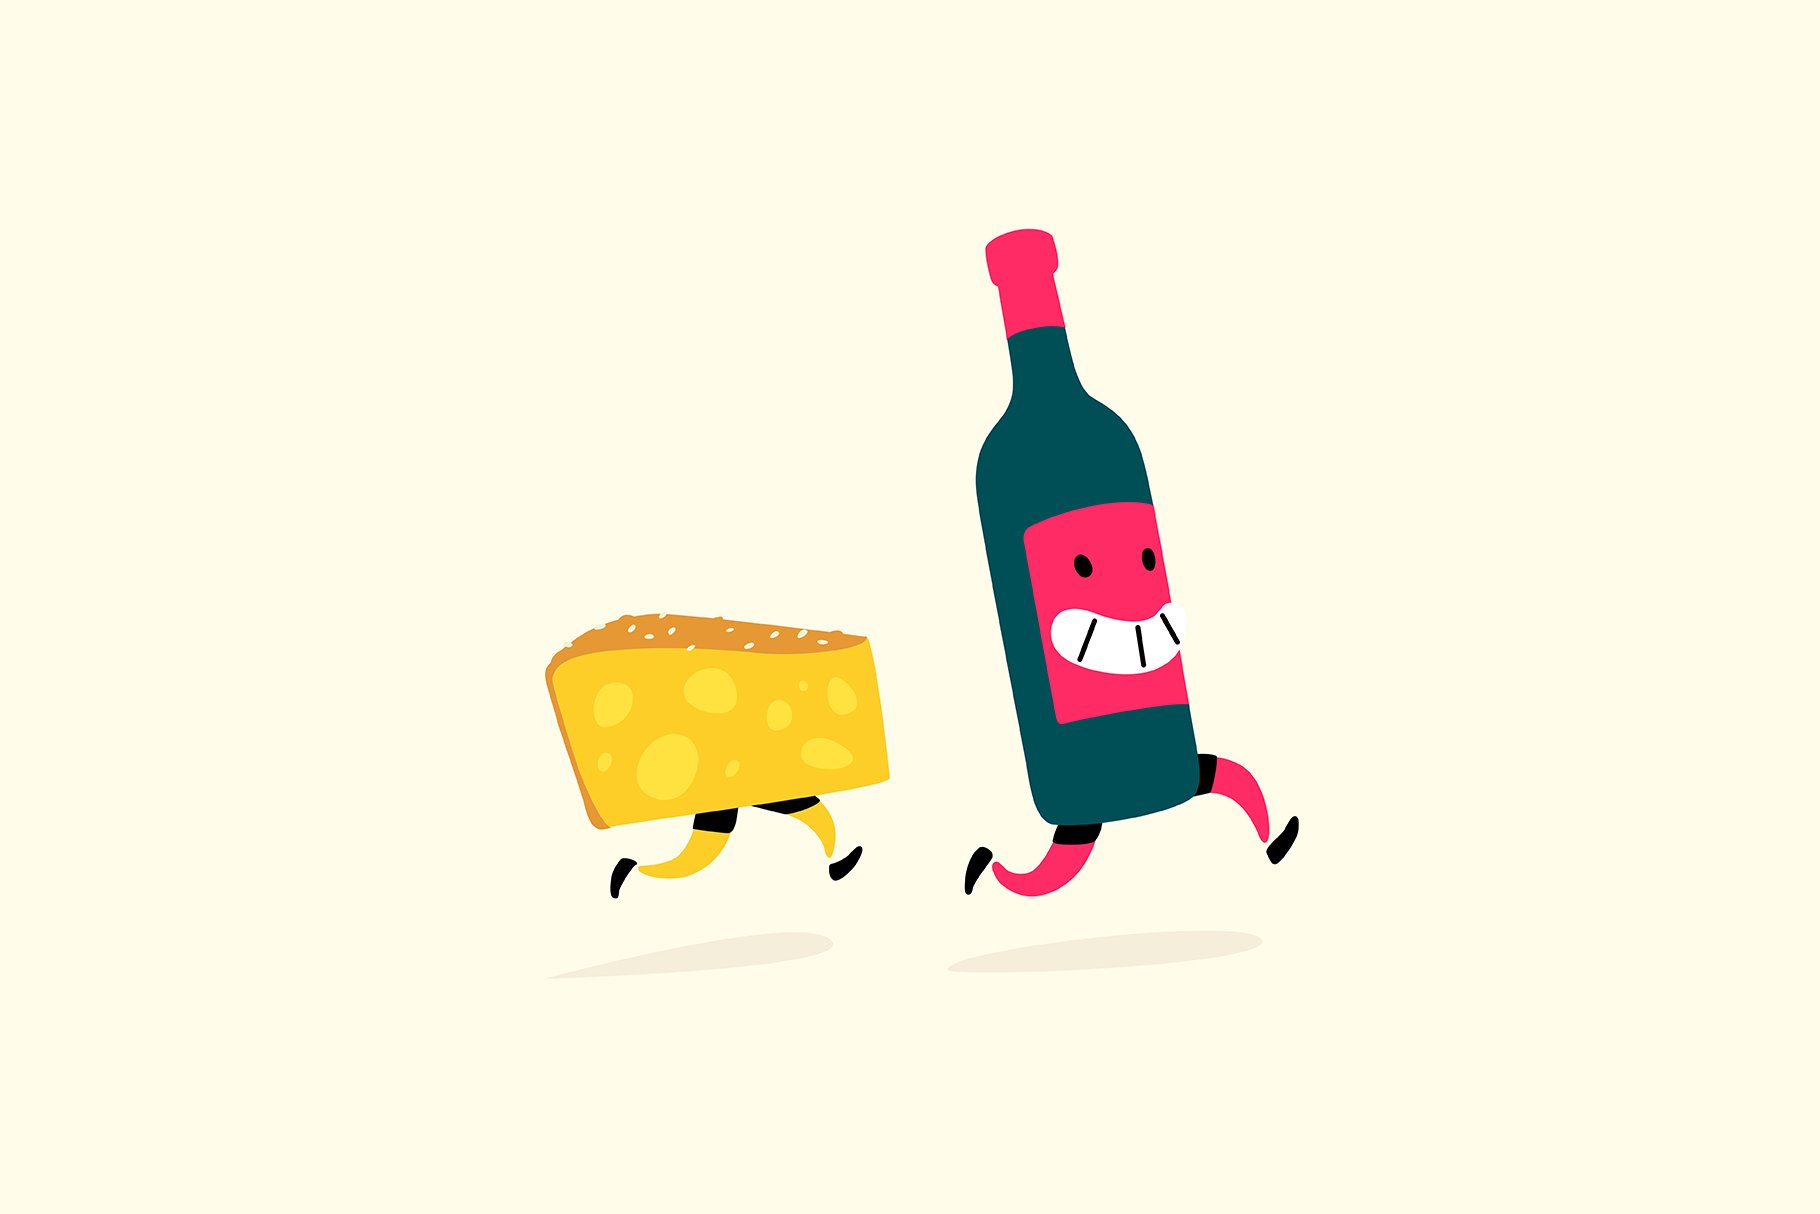 Bottle of wine and cheese) cover image.